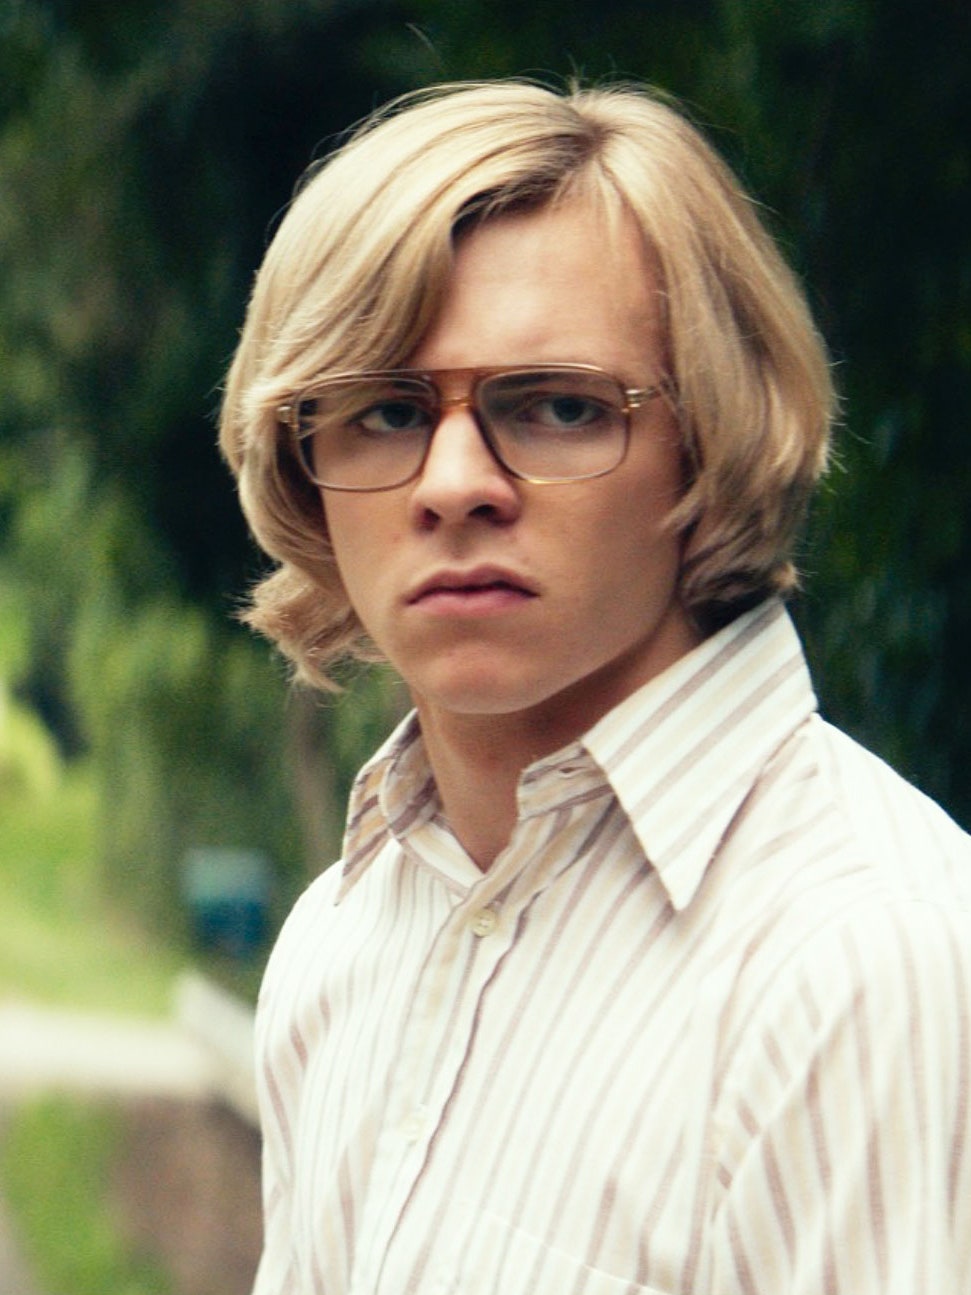 My Friend Dahmer' Star Ross Lynch on Going from the Disney Channel to Jeffrey Dahmer